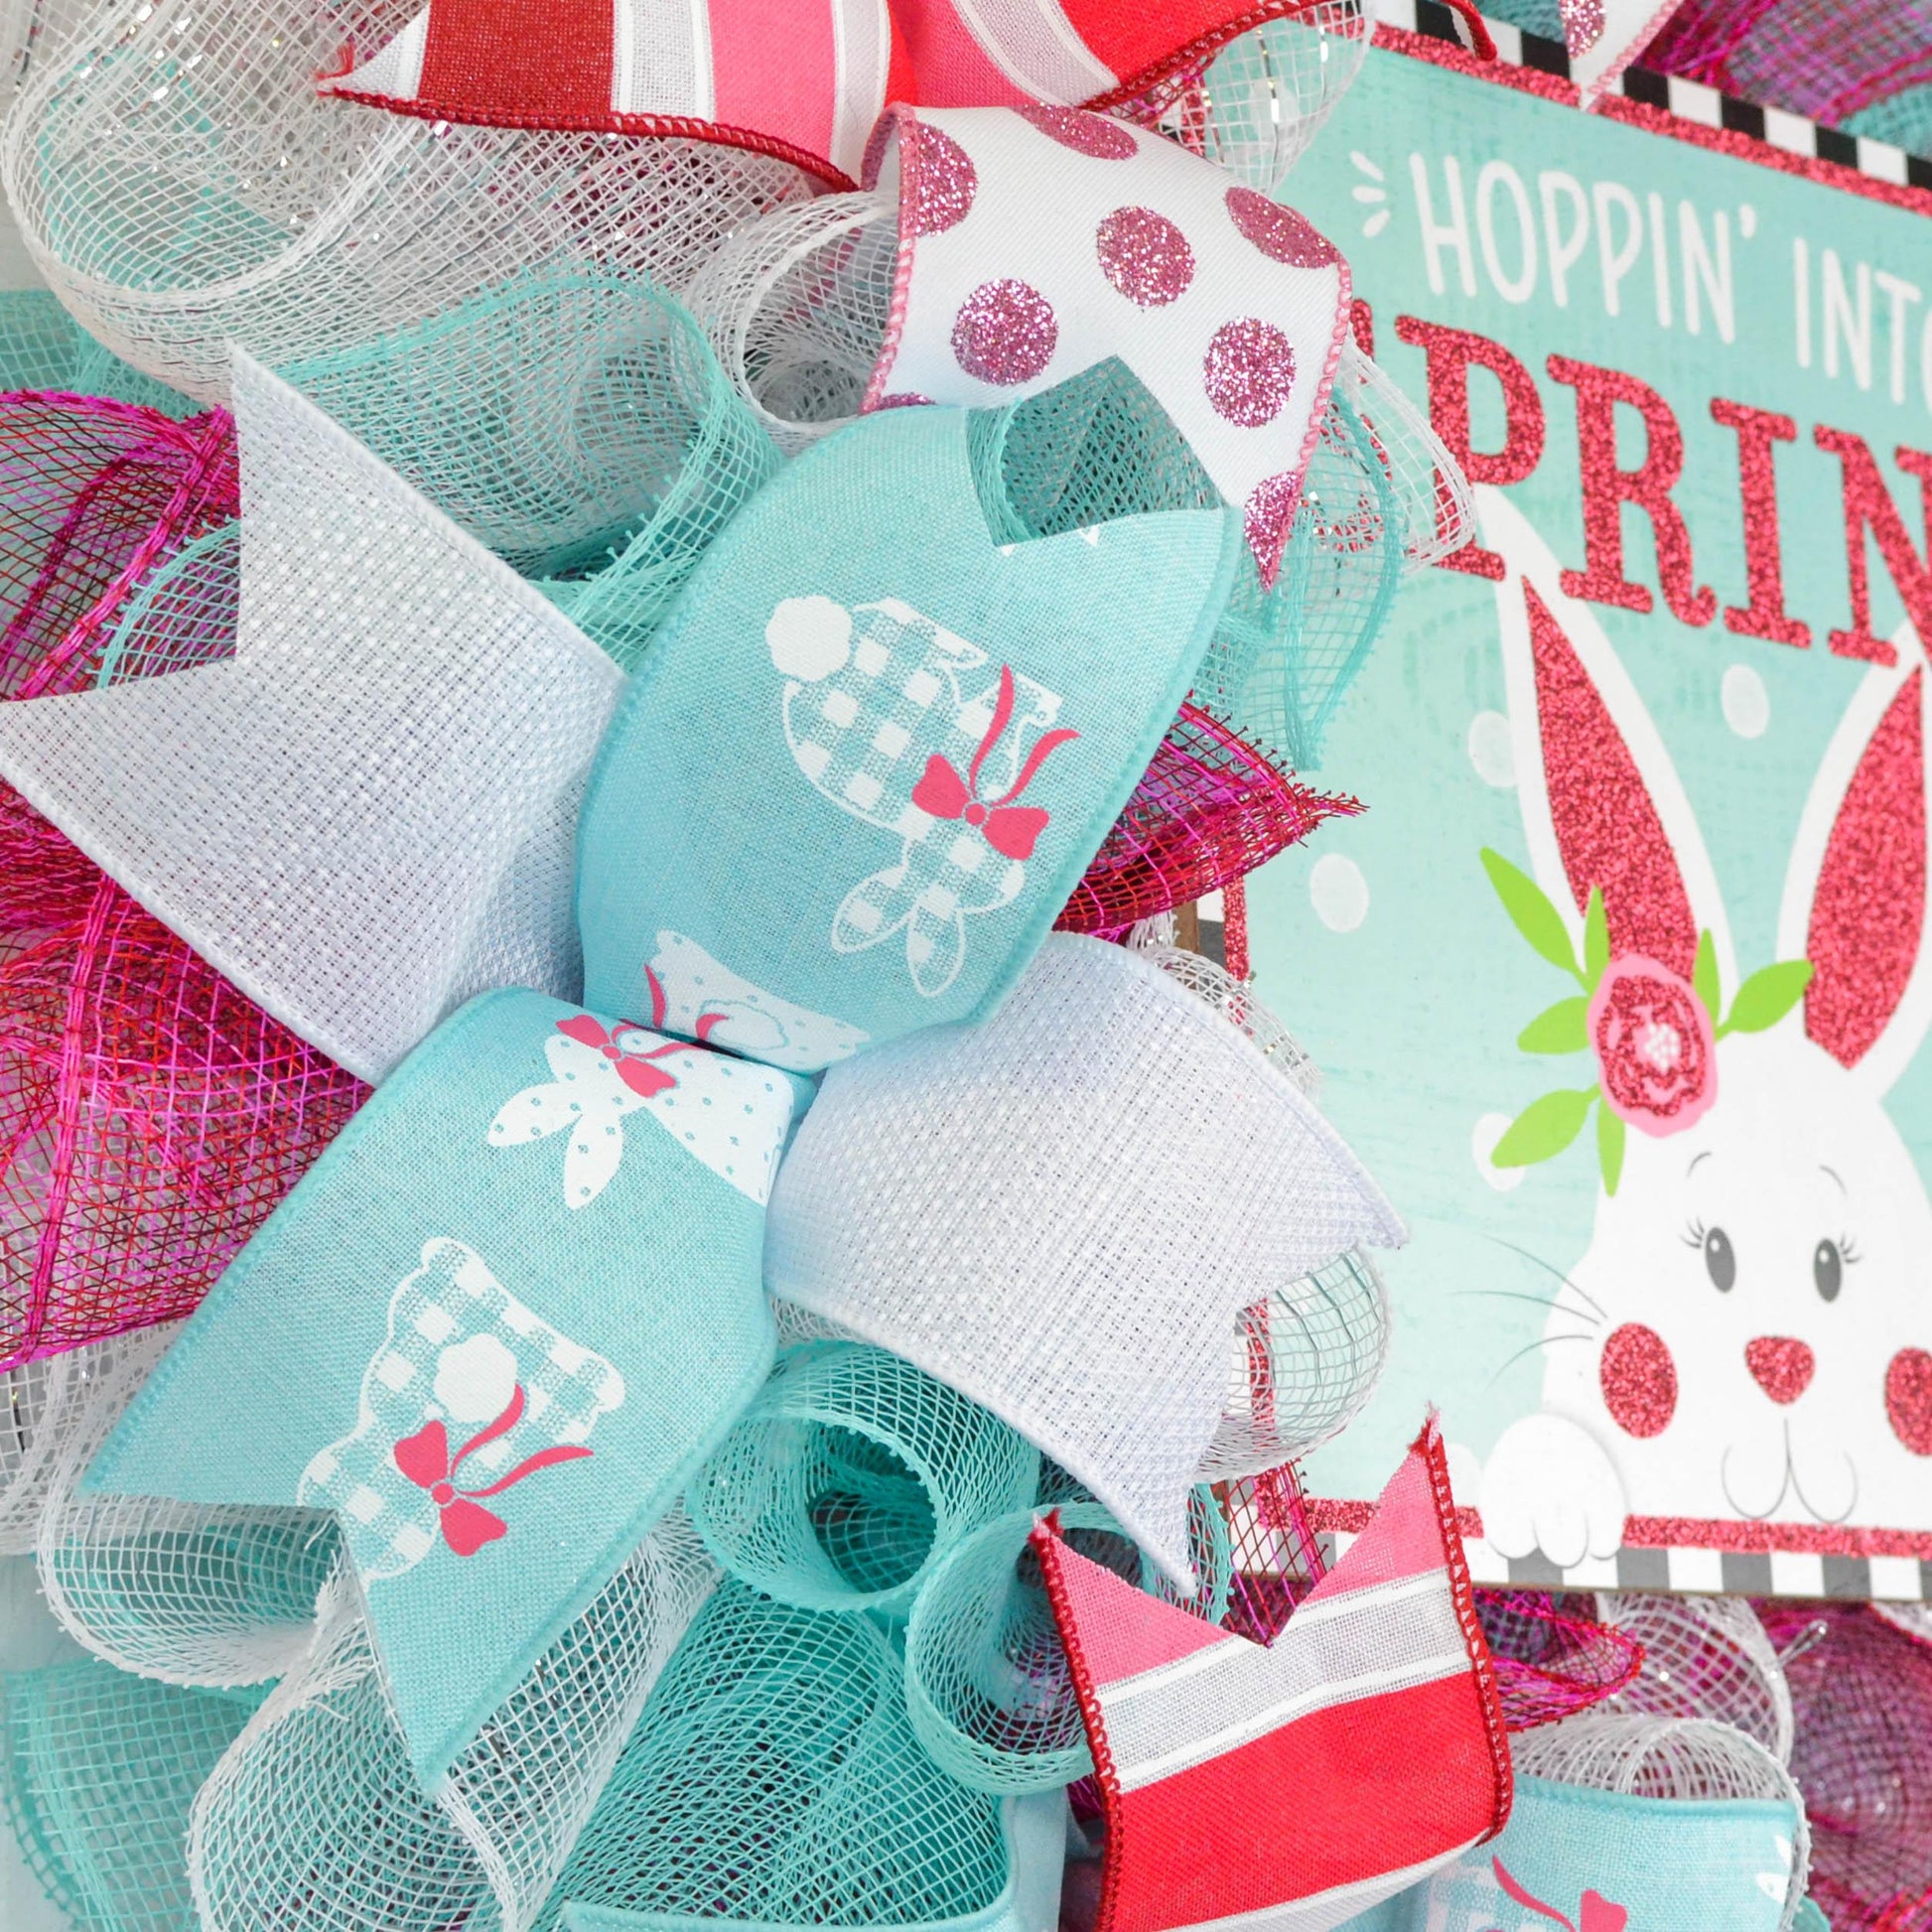 Pink and Turquoise Hopping into Spring Wreath - Summer Decor - Easter Door Decorations - Pink Turquoise Bunny Wreaths - Pink Door Wreaths